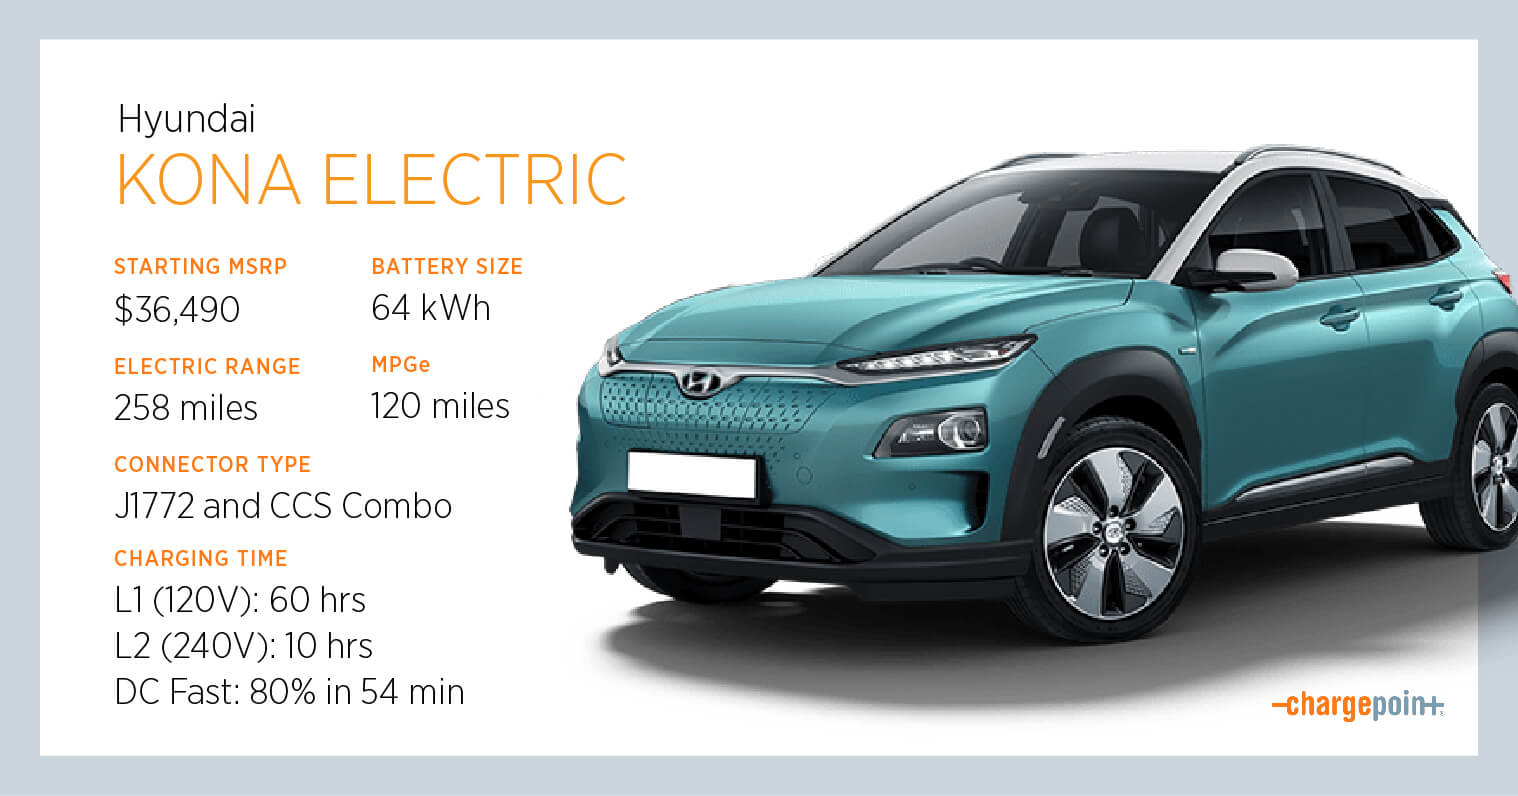 Everything You Need to Know About Charging the Hyundai Kona